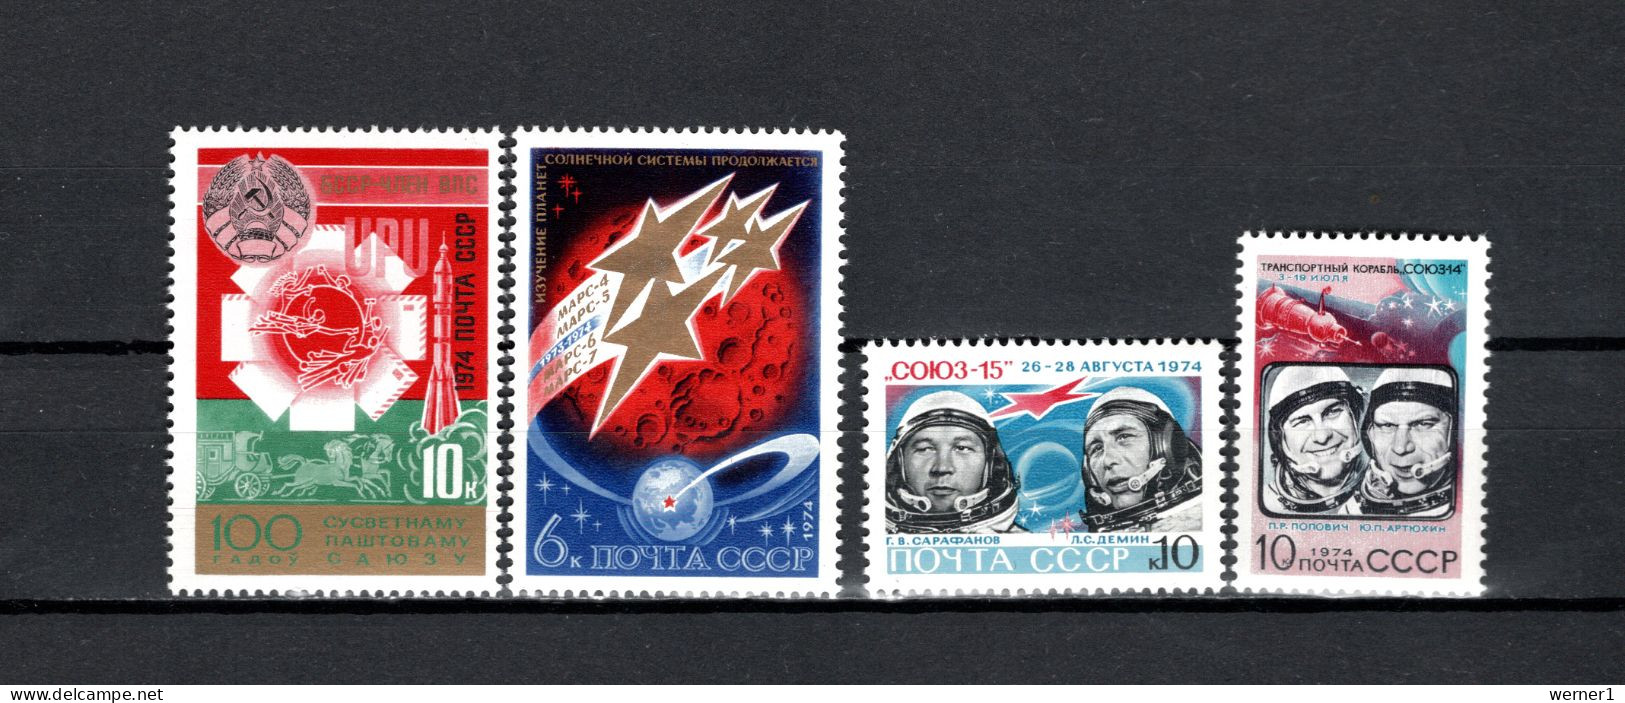 USSR Russia 1974 Space, UPU Centenary, Space Achievement, Soyuz 14 And 15, 4 Stamps MNH - Russia & USSR